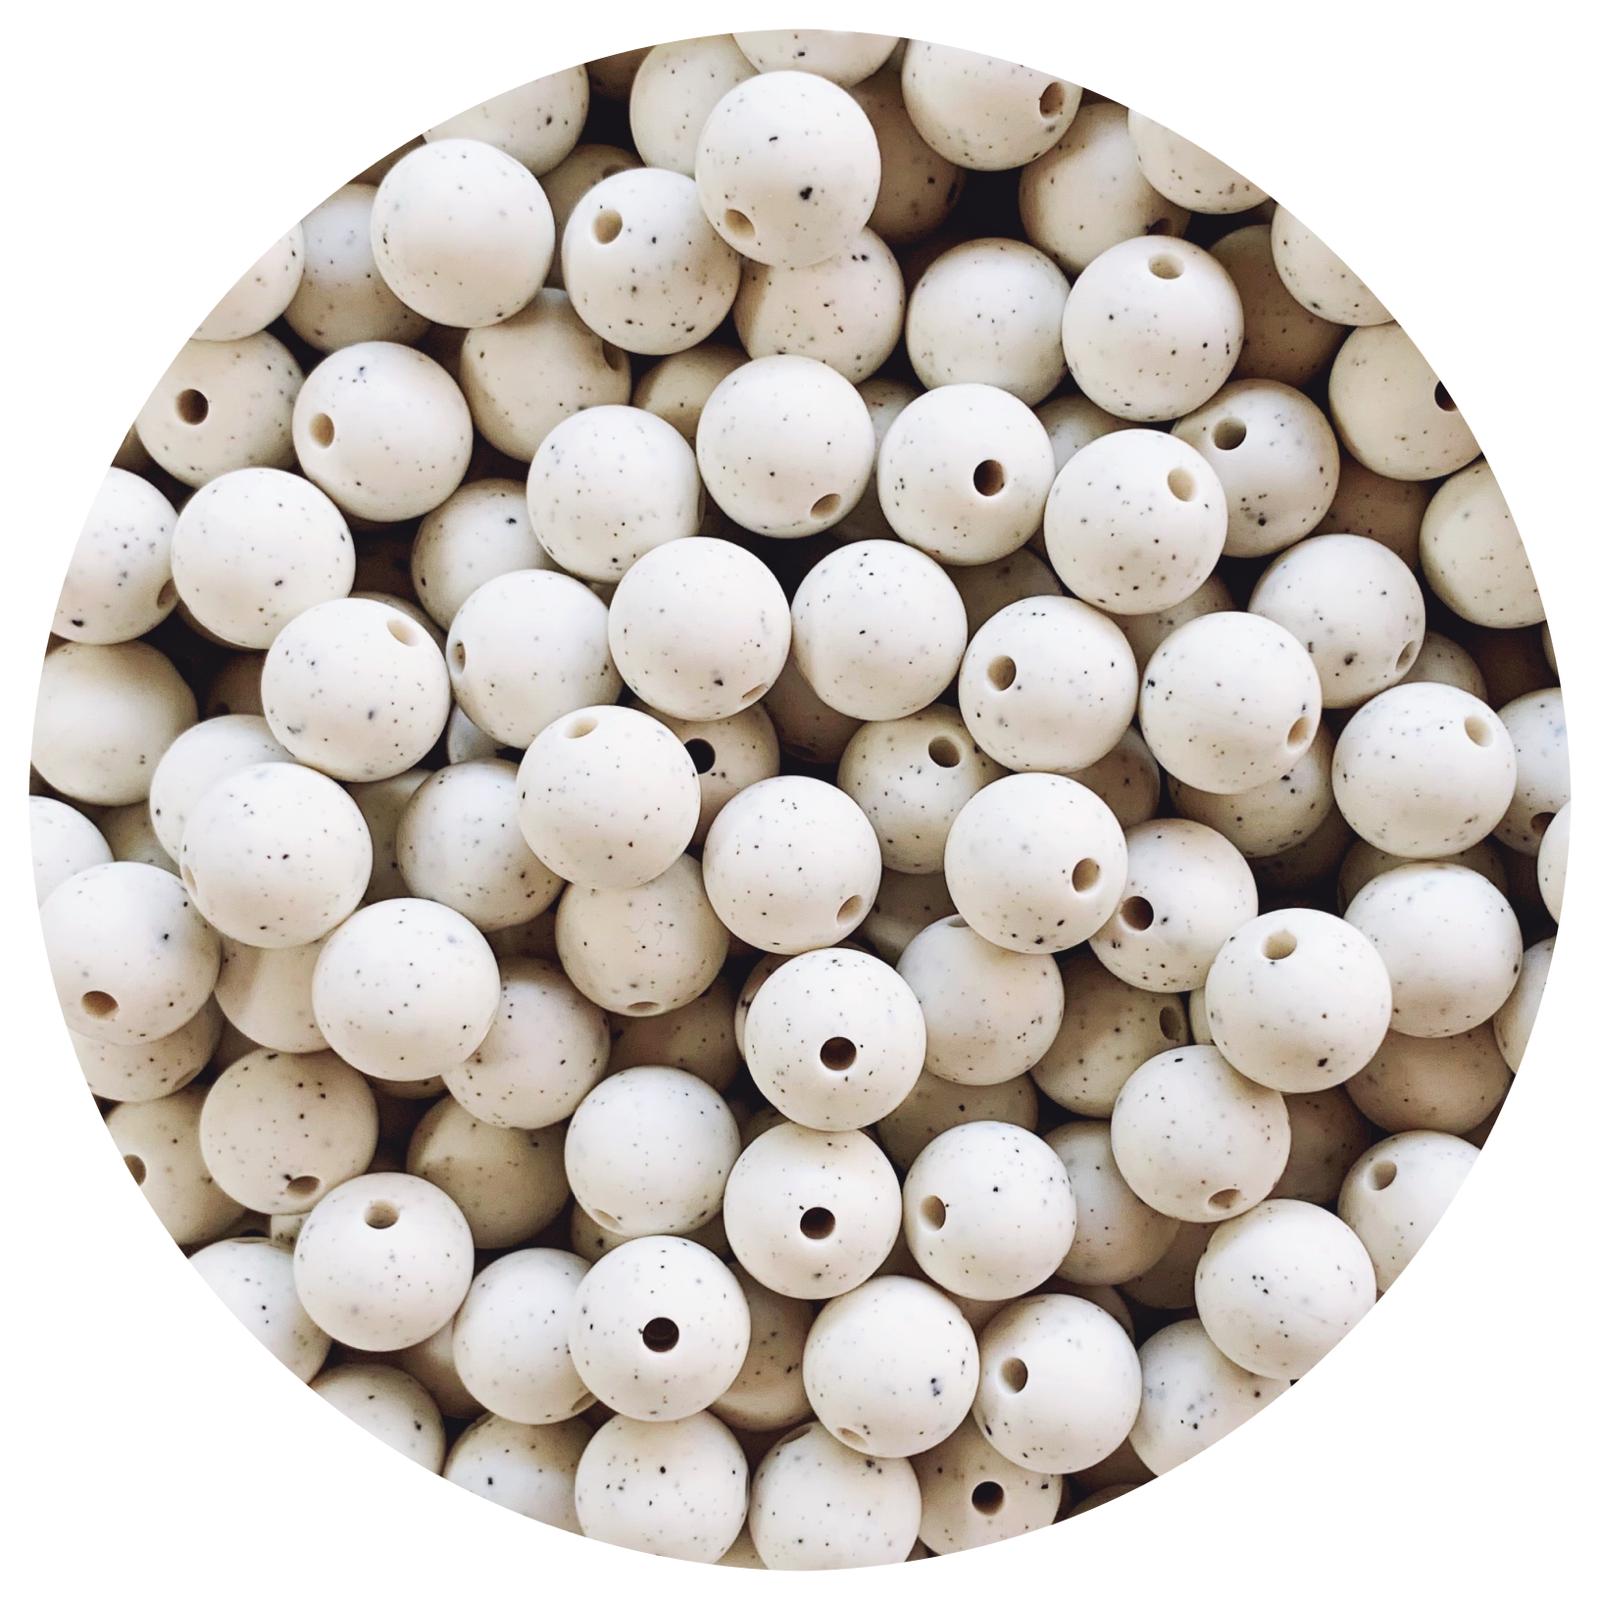 Linen Speckled - 12mm Round Silicone Beads - 10 beads